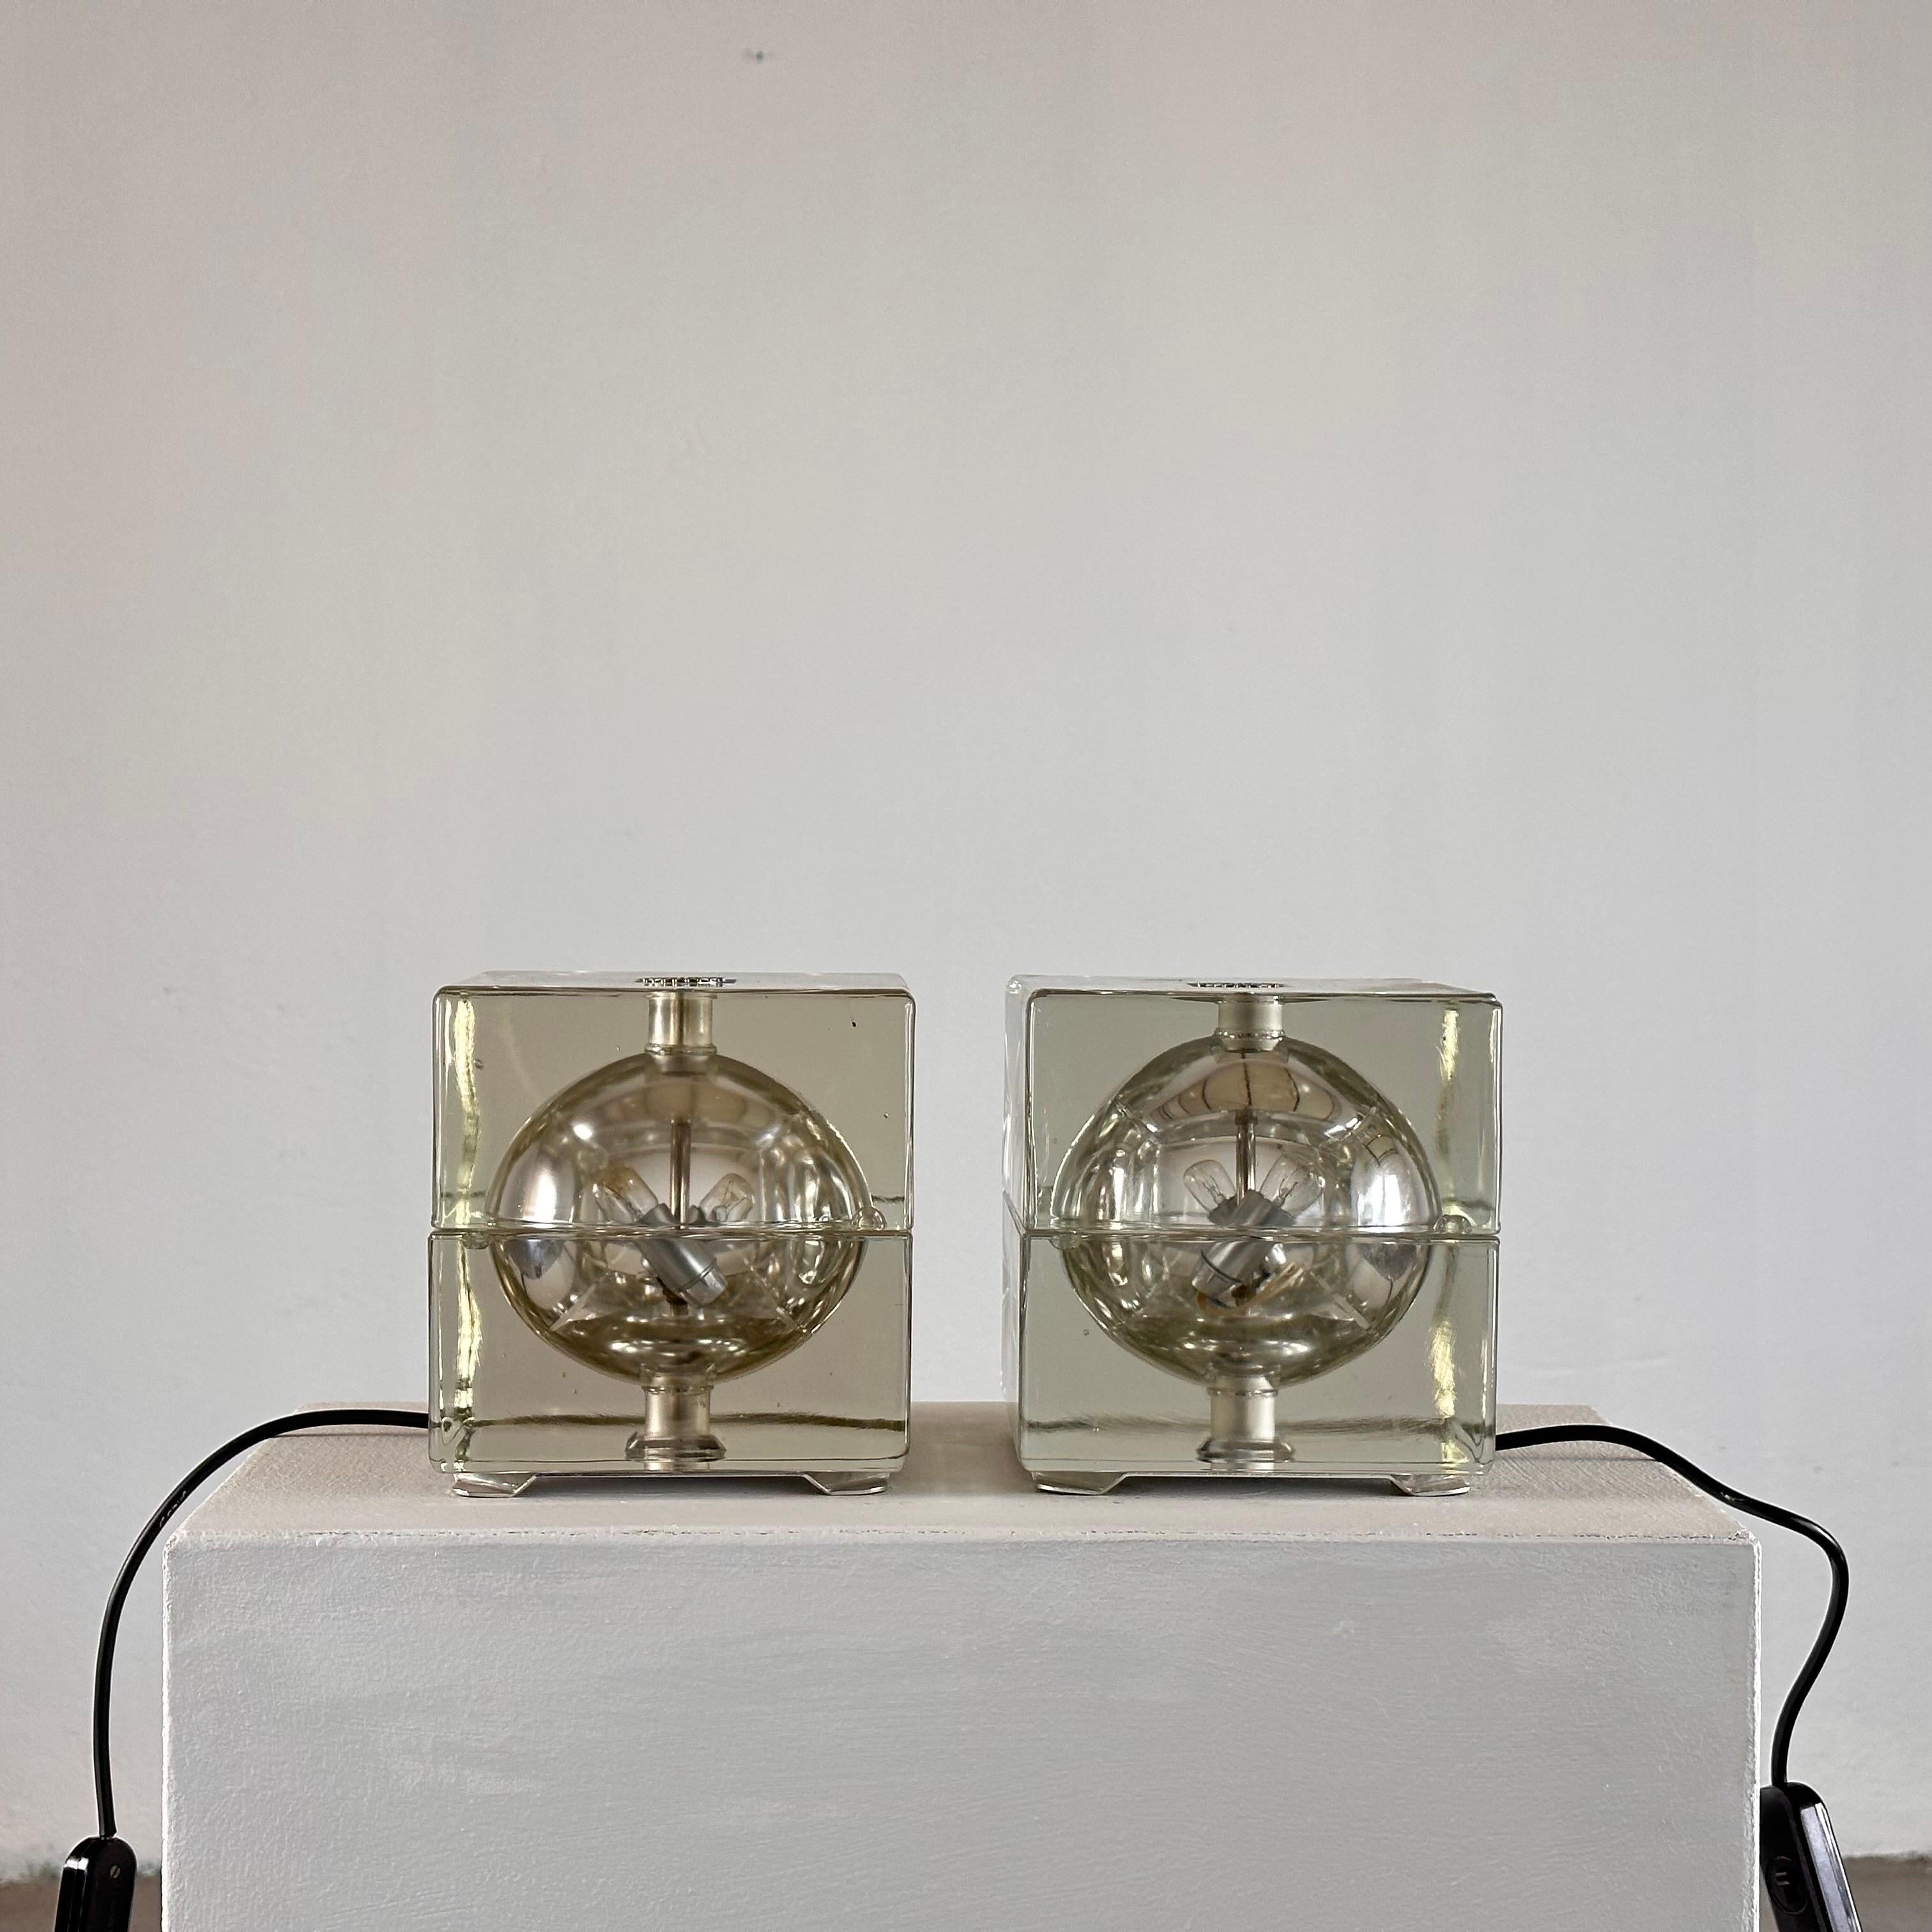 Mid-Century Modern “Cubosfera” Pair Table Lamps by Alessandro Mendini for Fidenza Vetraria, 1960s For Sale